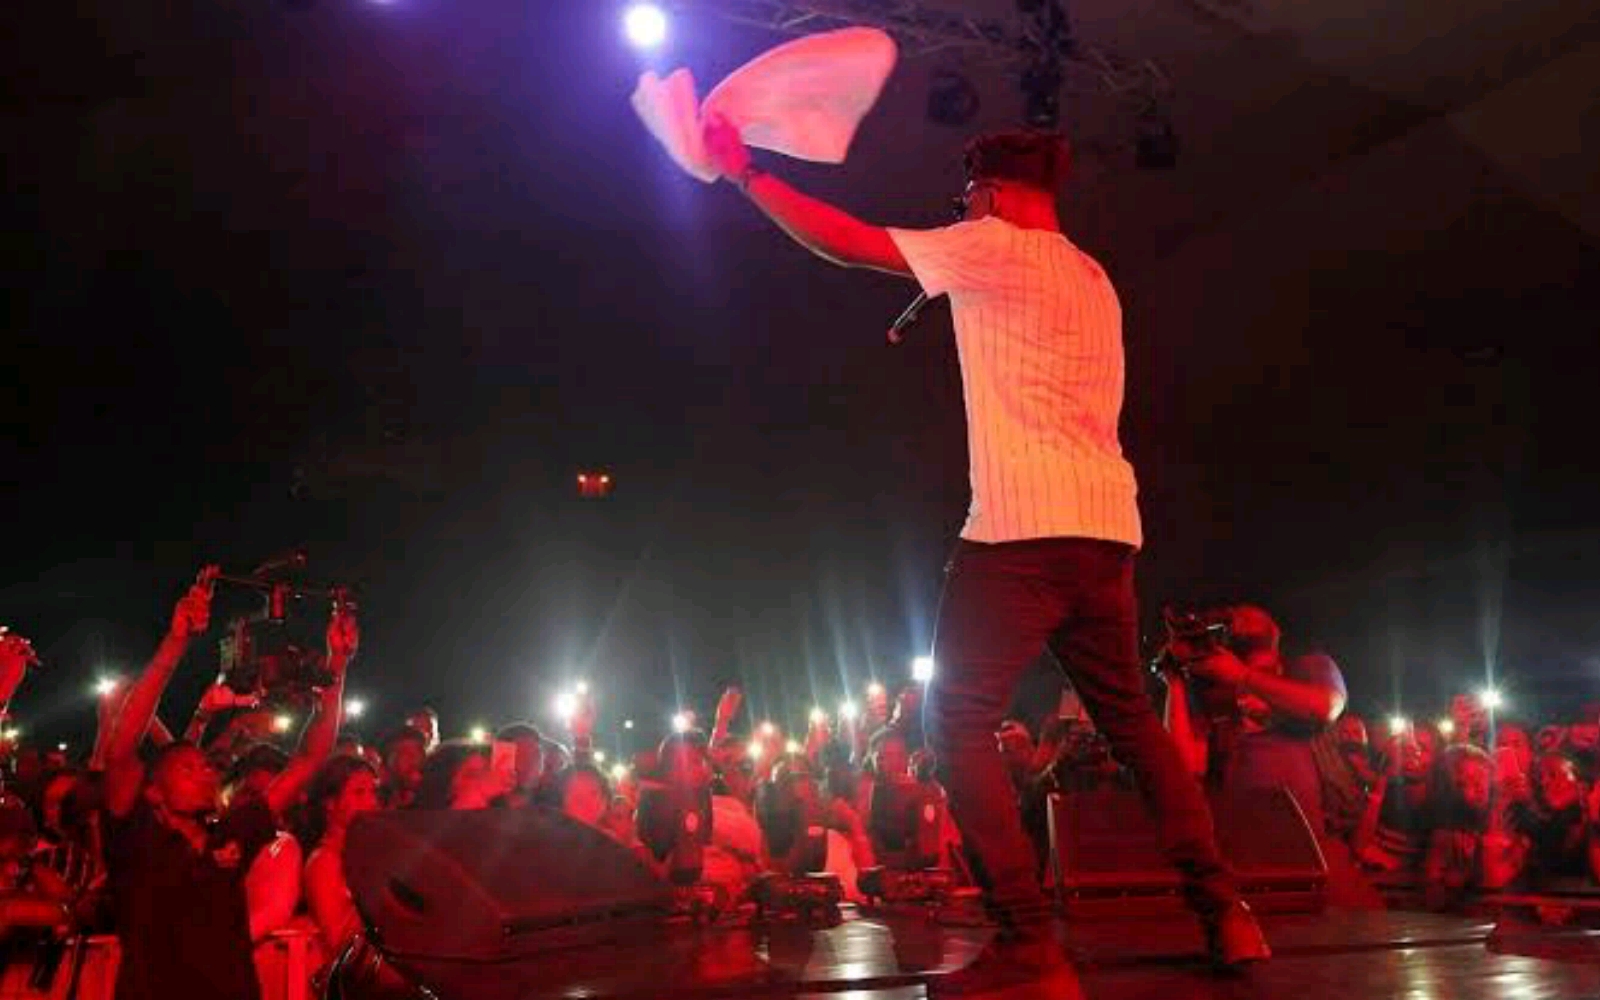 How Nigerian A-list music artists show up for shows in multimillion naira  outfits